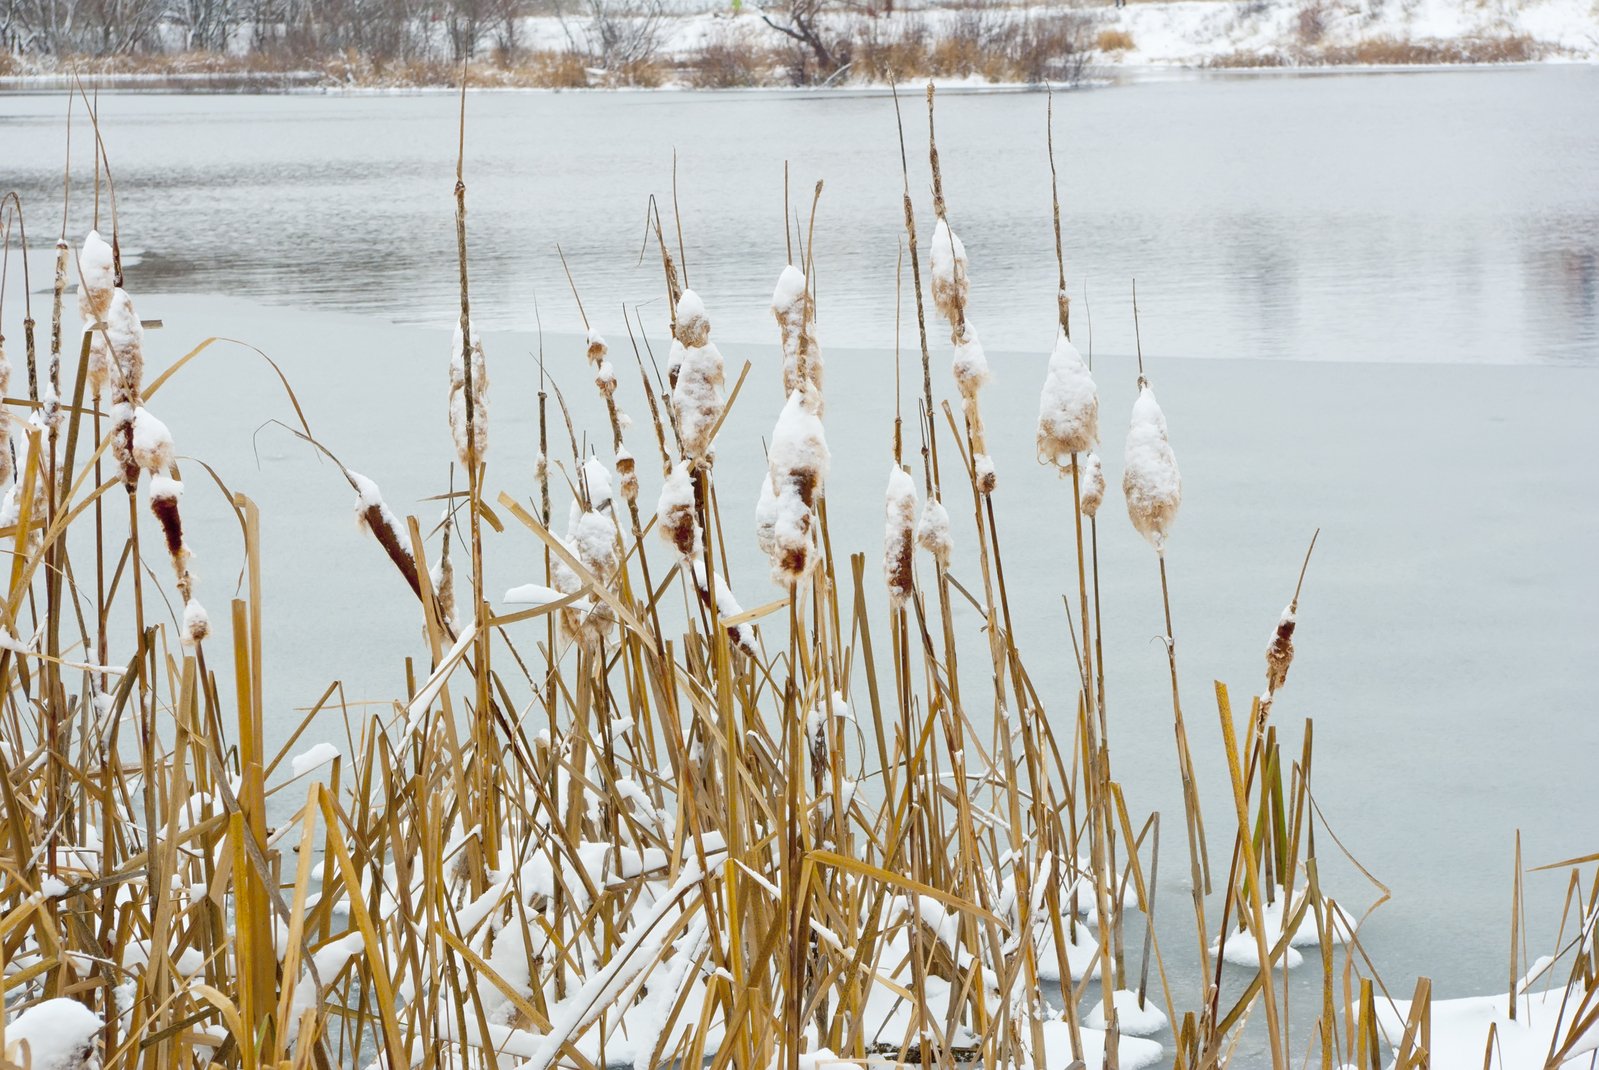 the frozen plants are growing near the water